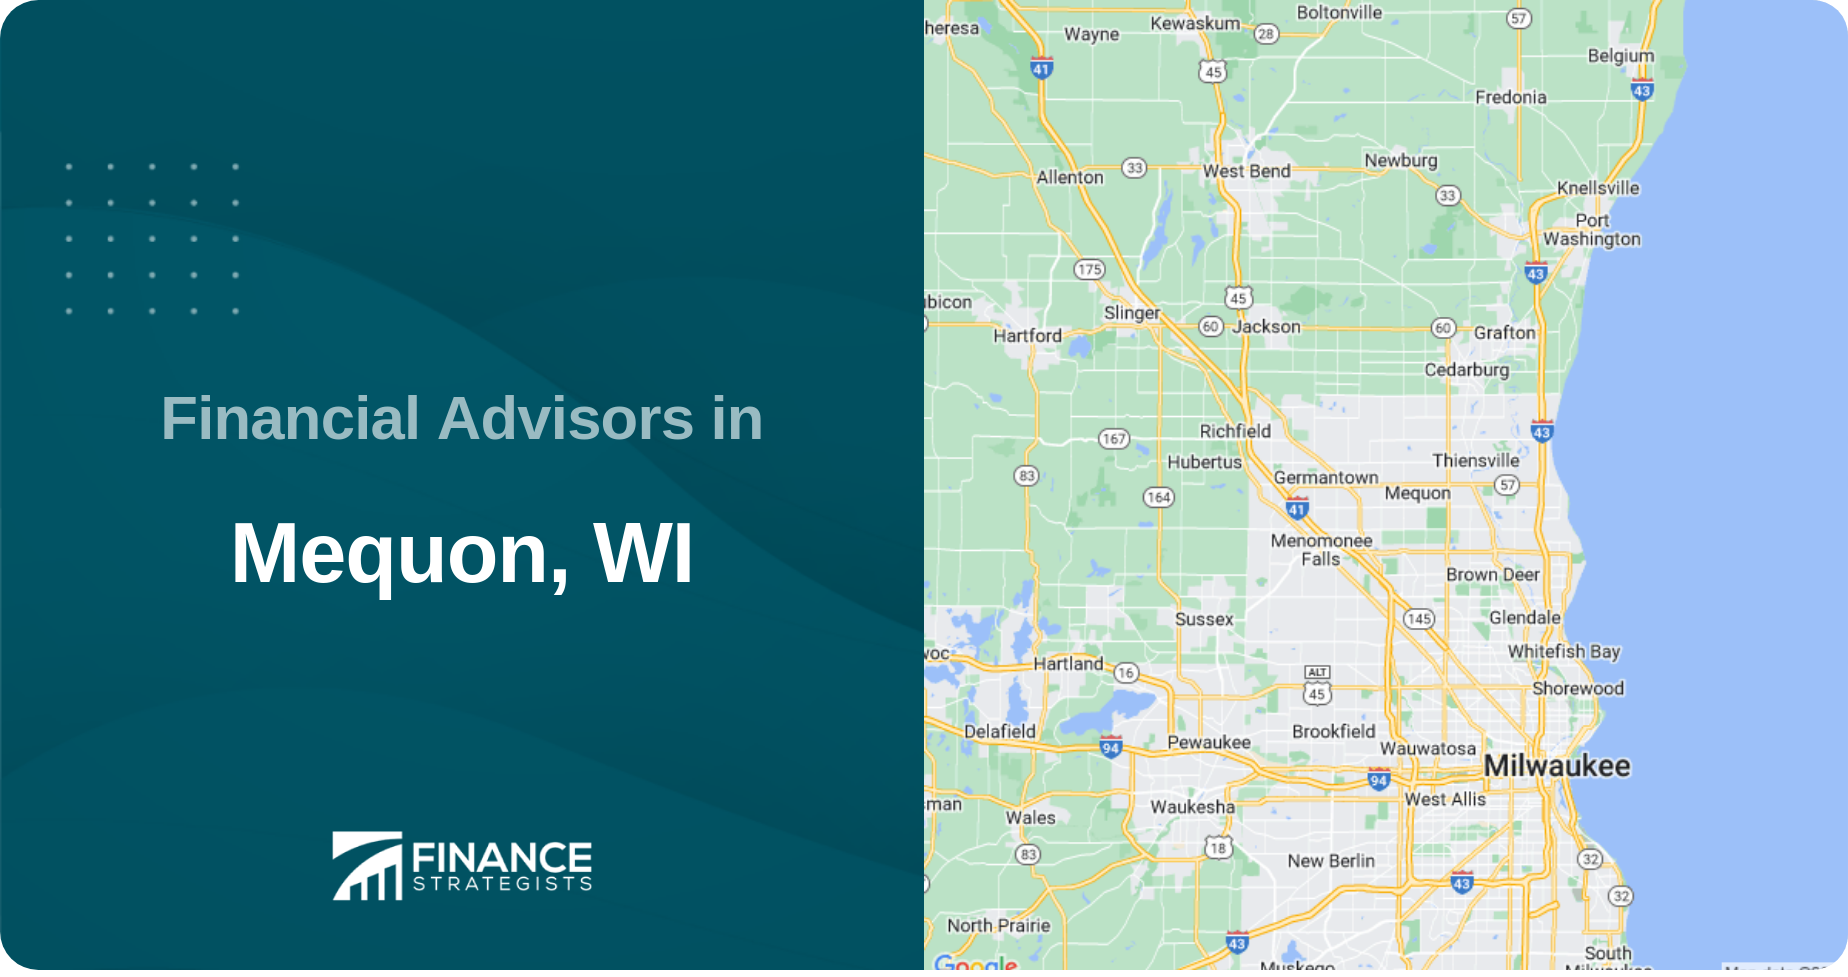 Financial Advisors in Mequon, WI